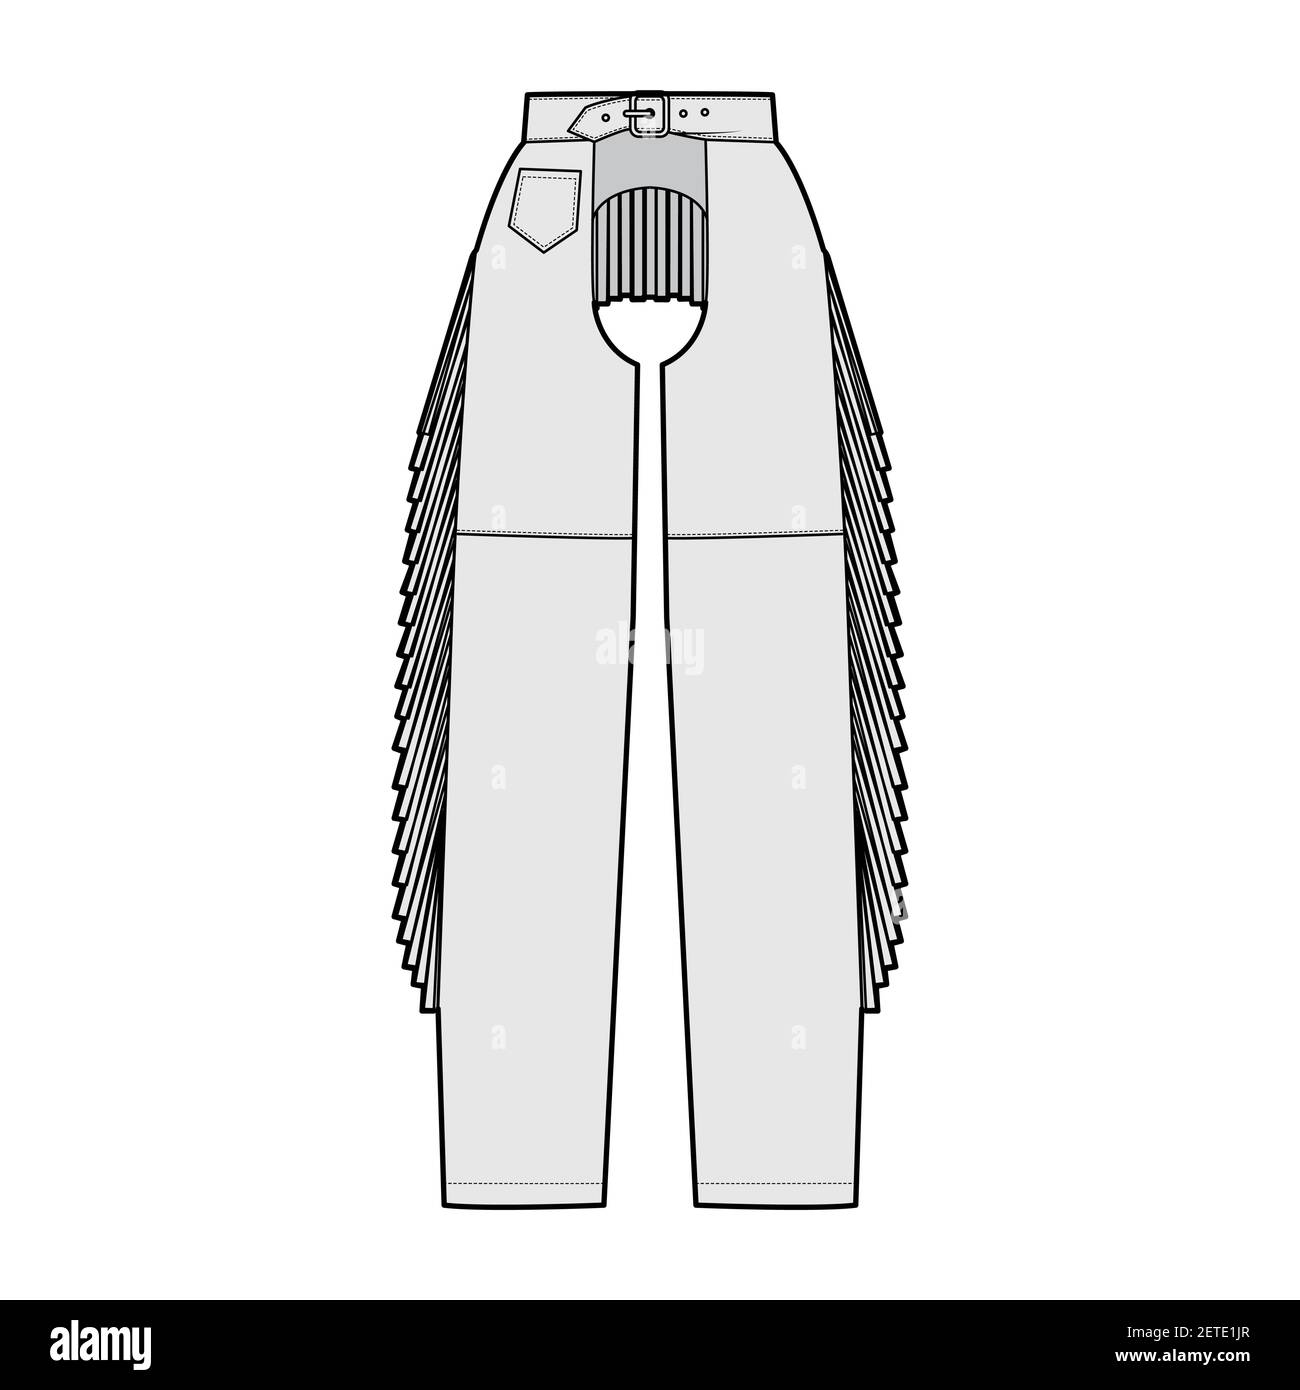 Pants of Cowboy Vector Icon.Cartoon Vector Icon Isolated on White  Background Pants of Cowboy. Stock Vector - Illustration of apparel,  background: 176517969